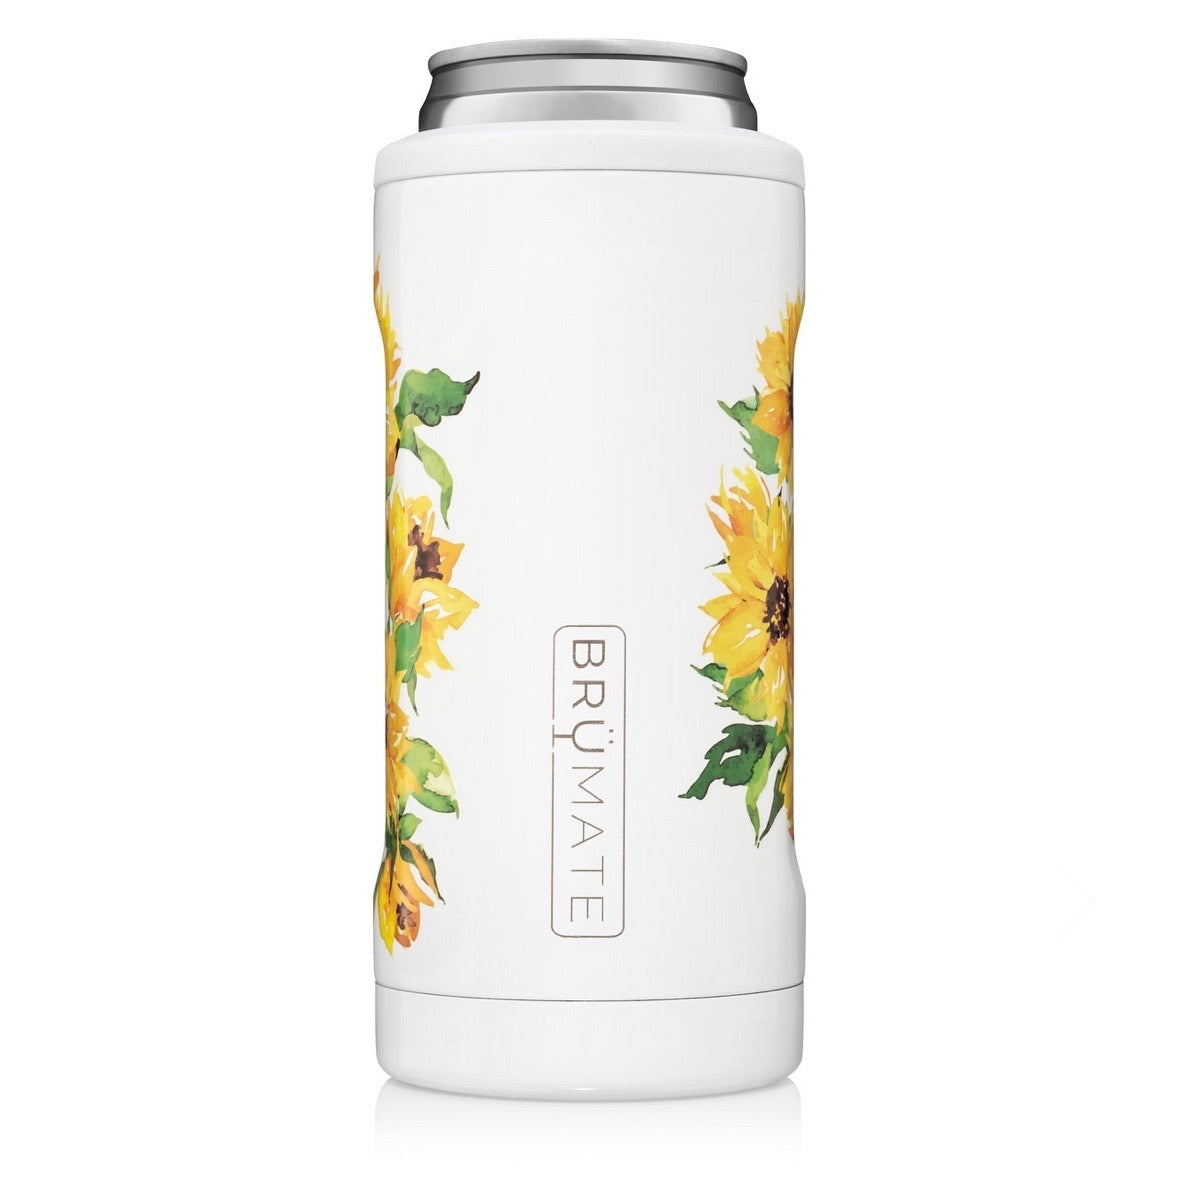 slim cans leak-proof drinkware hot to cold insulated drinkware tumbler like yeti brumate spillproof sunflowers